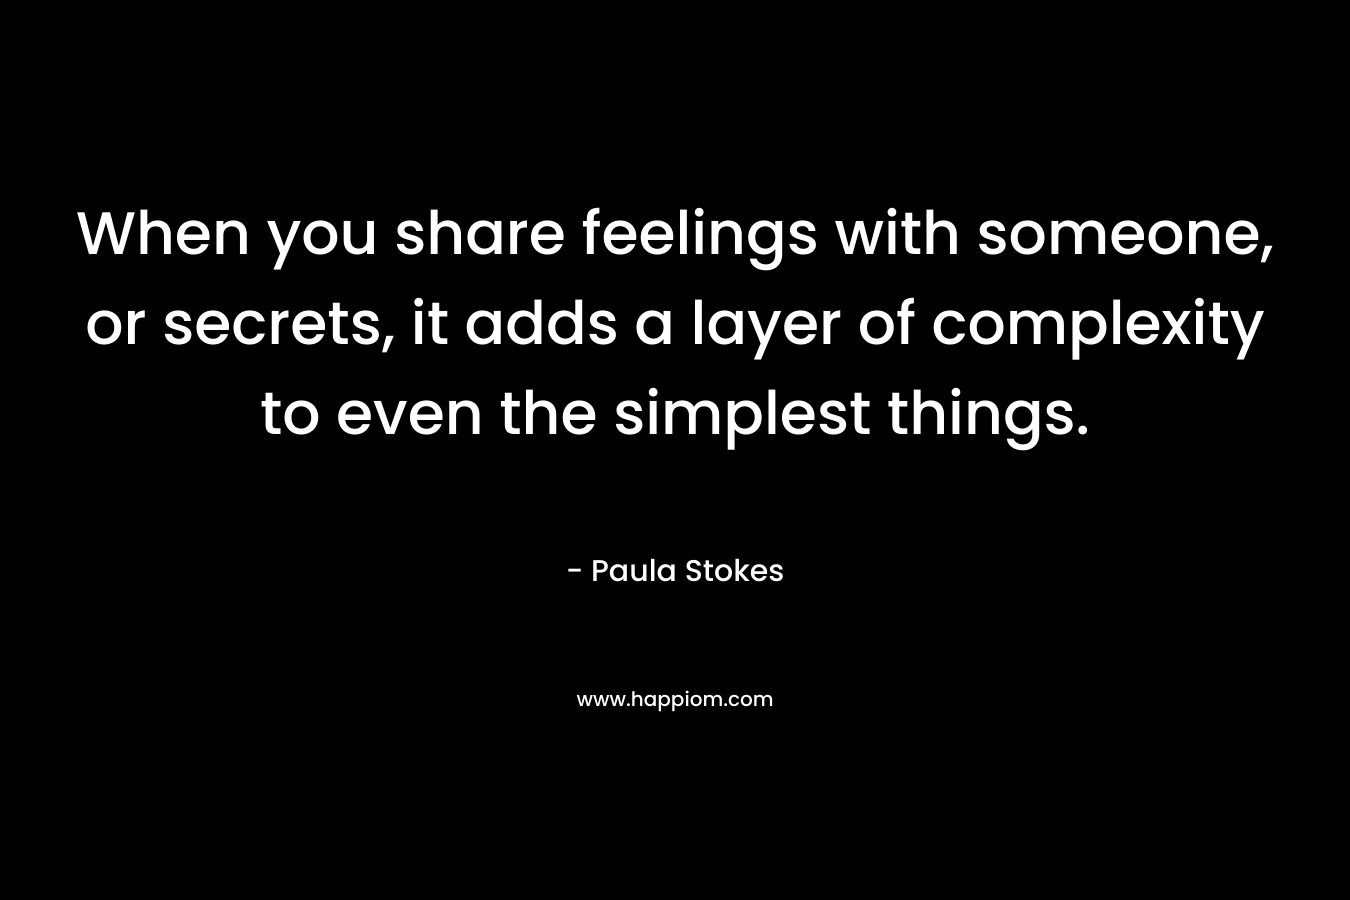 When you share feelings with someone, or secrets, it adds a layer of complexity to even the simplest things. – Paula Stokes